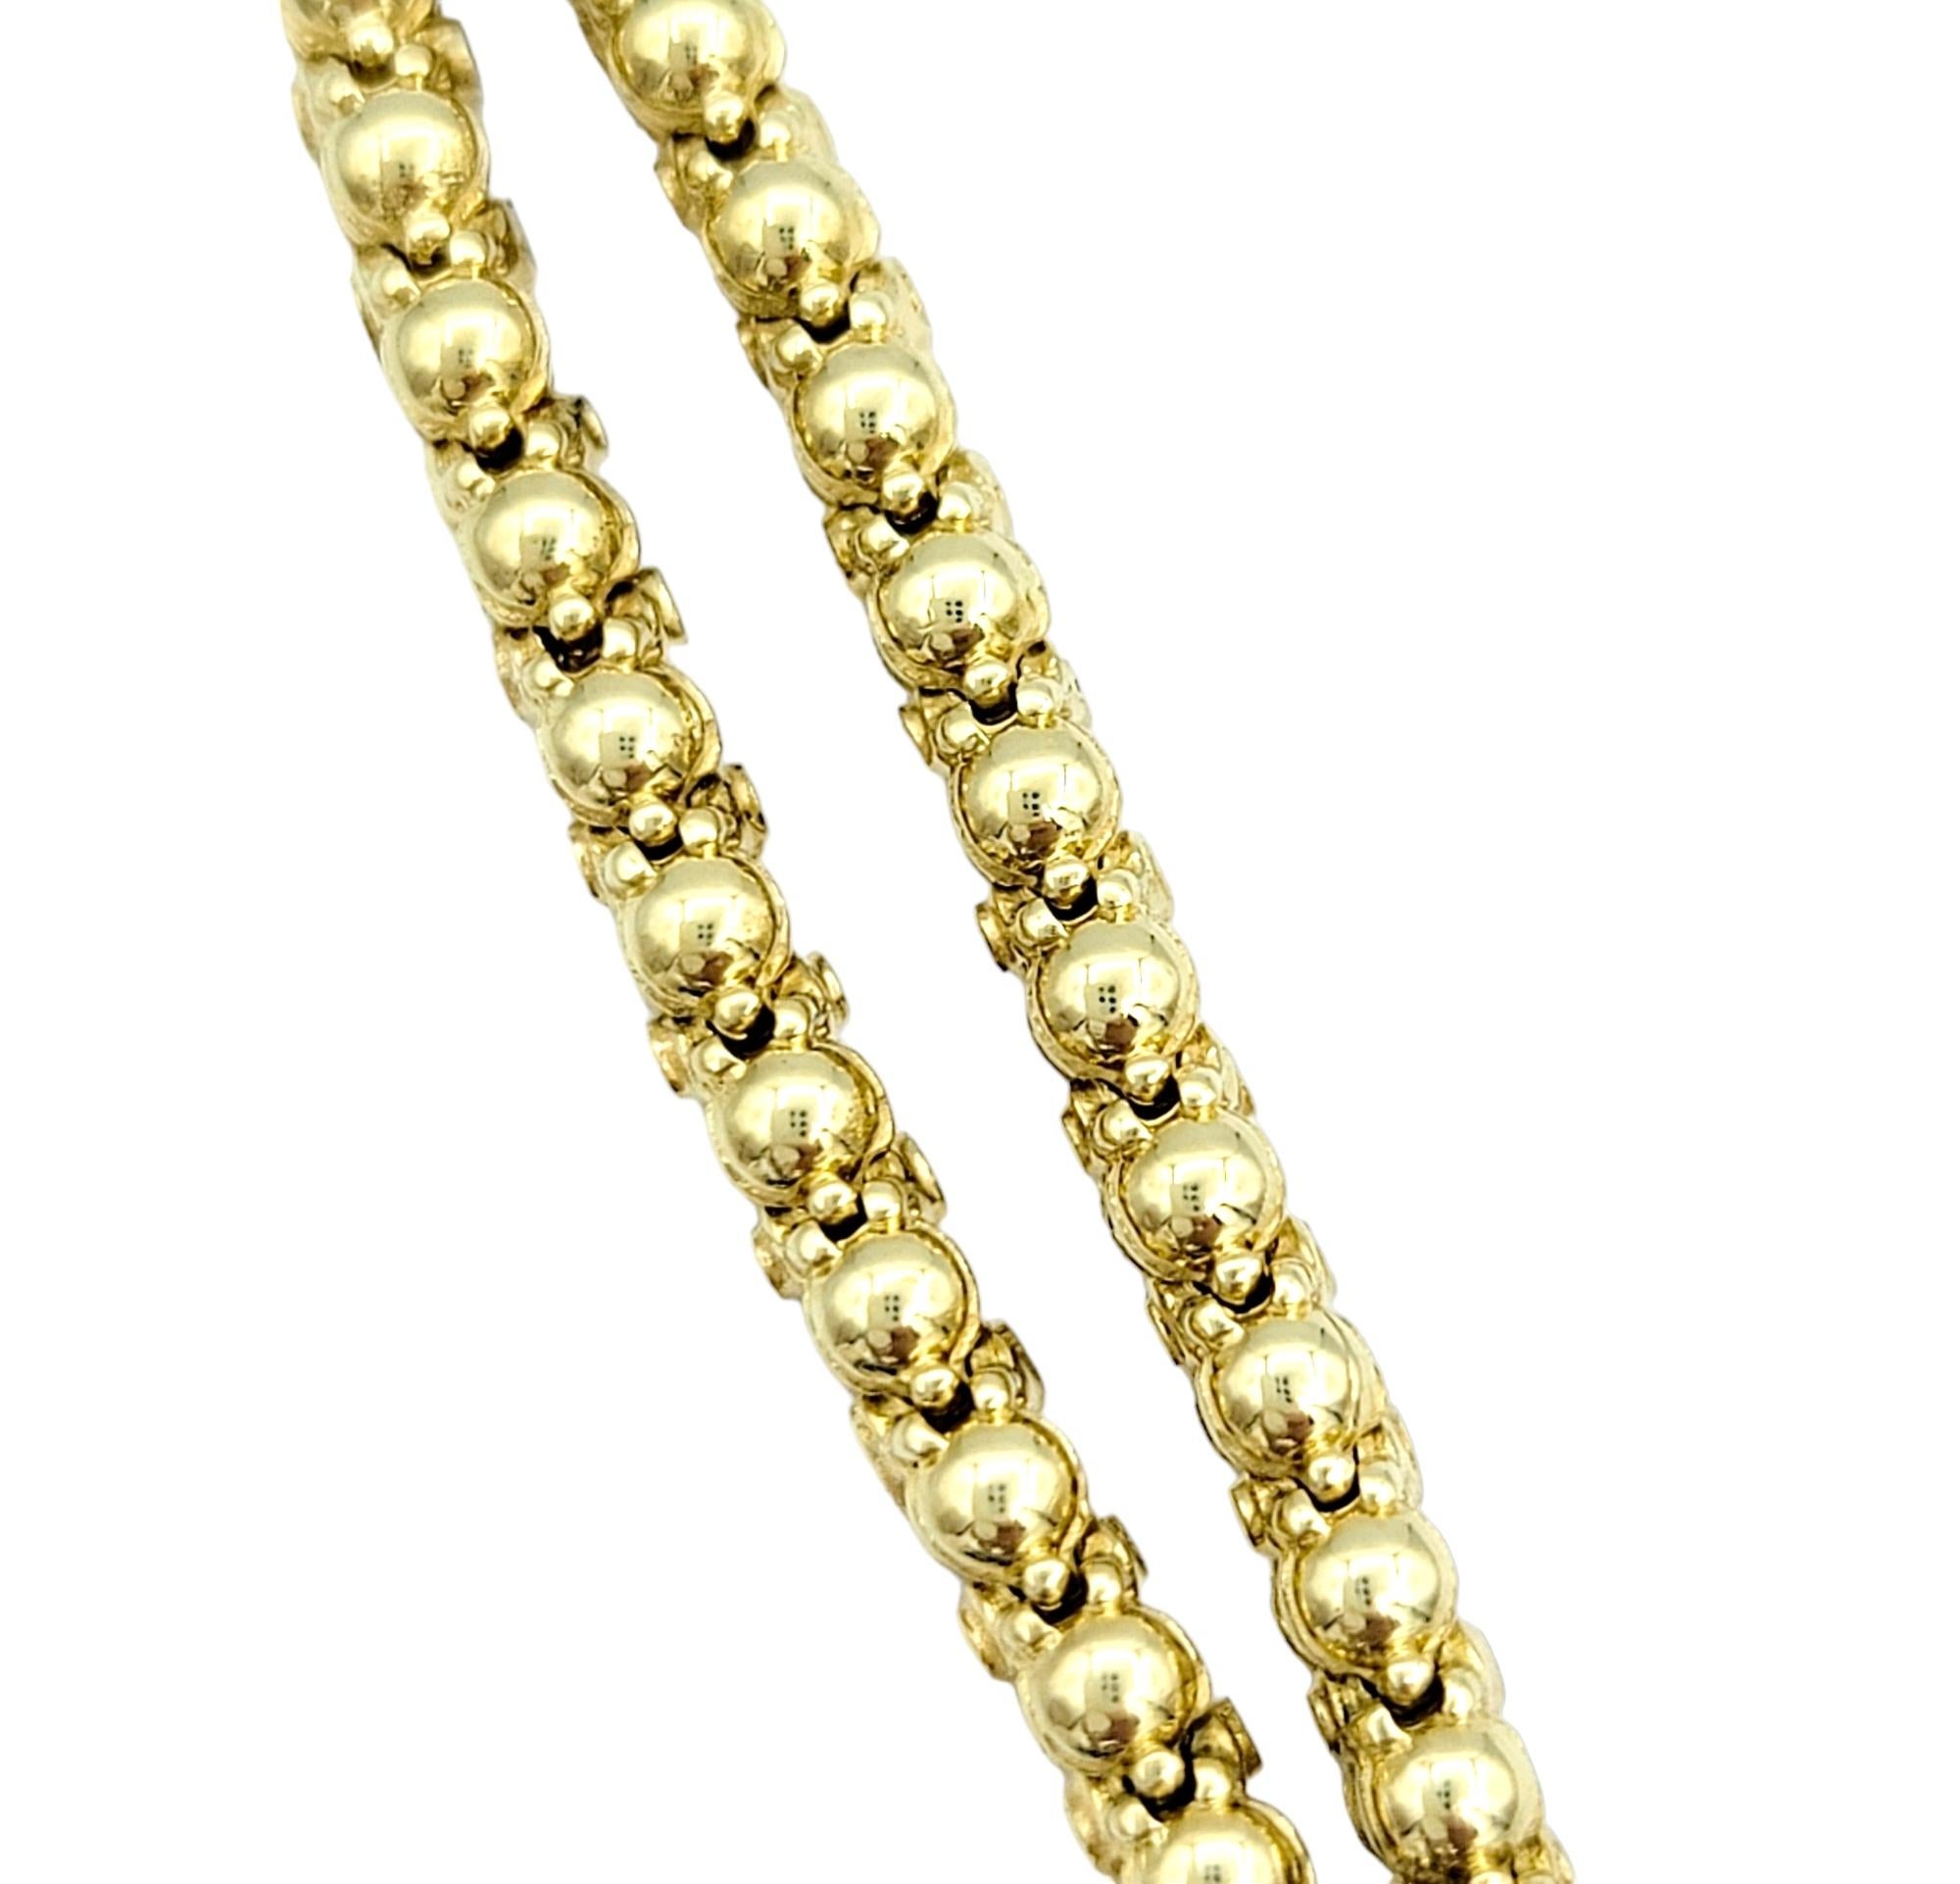 Round Cut 3.36 Carat Diamond Floral Double Row Bead Link Bracelet in 18 Karat Yellow Gold For Sale